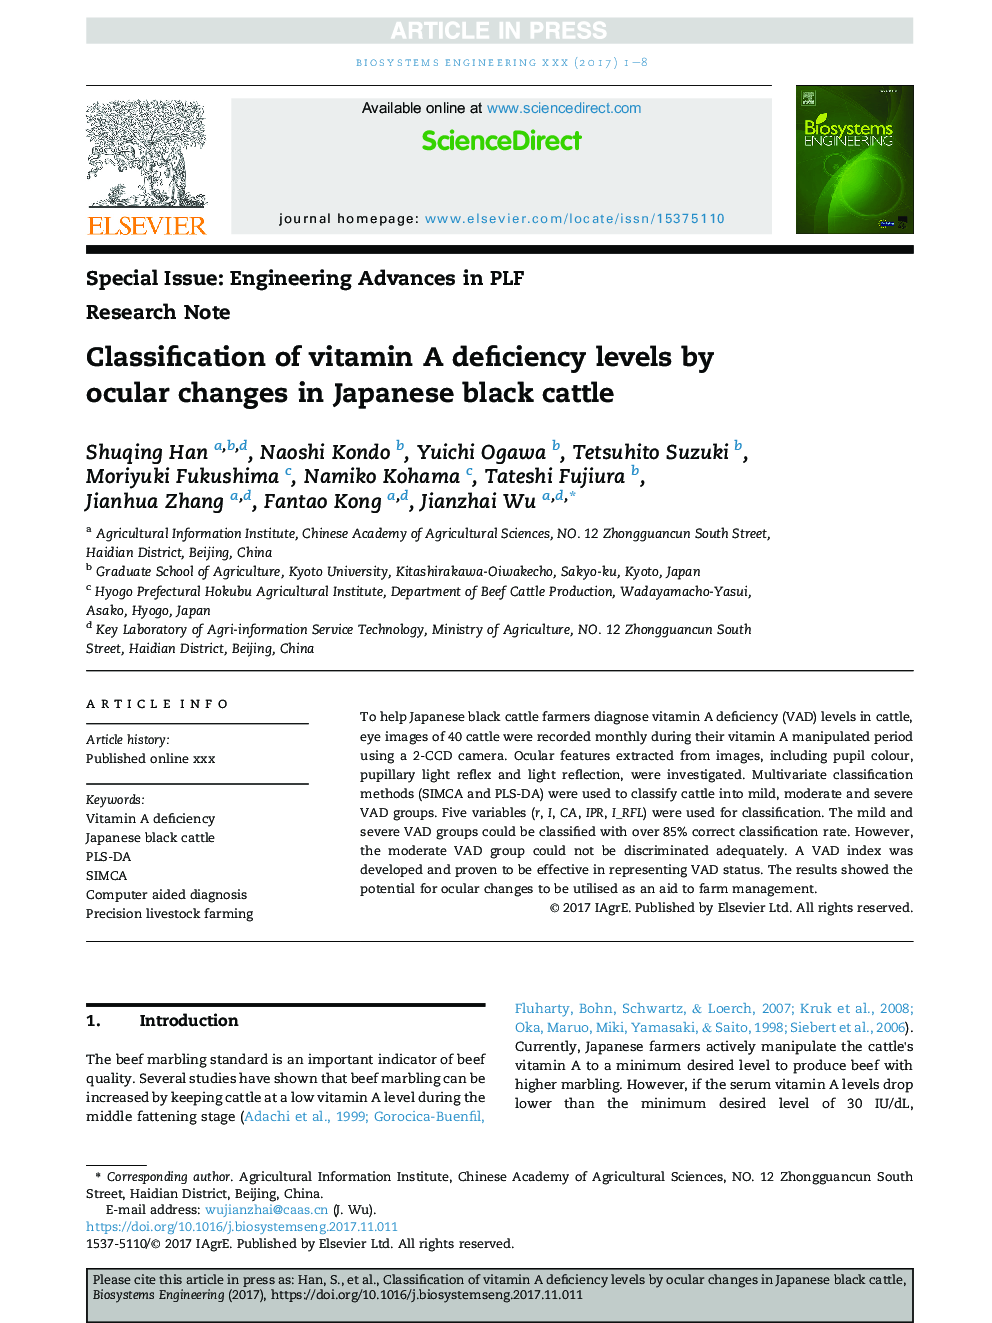 Classification of vitamin A deficiency levels by ocular changes in Japanese black cattle